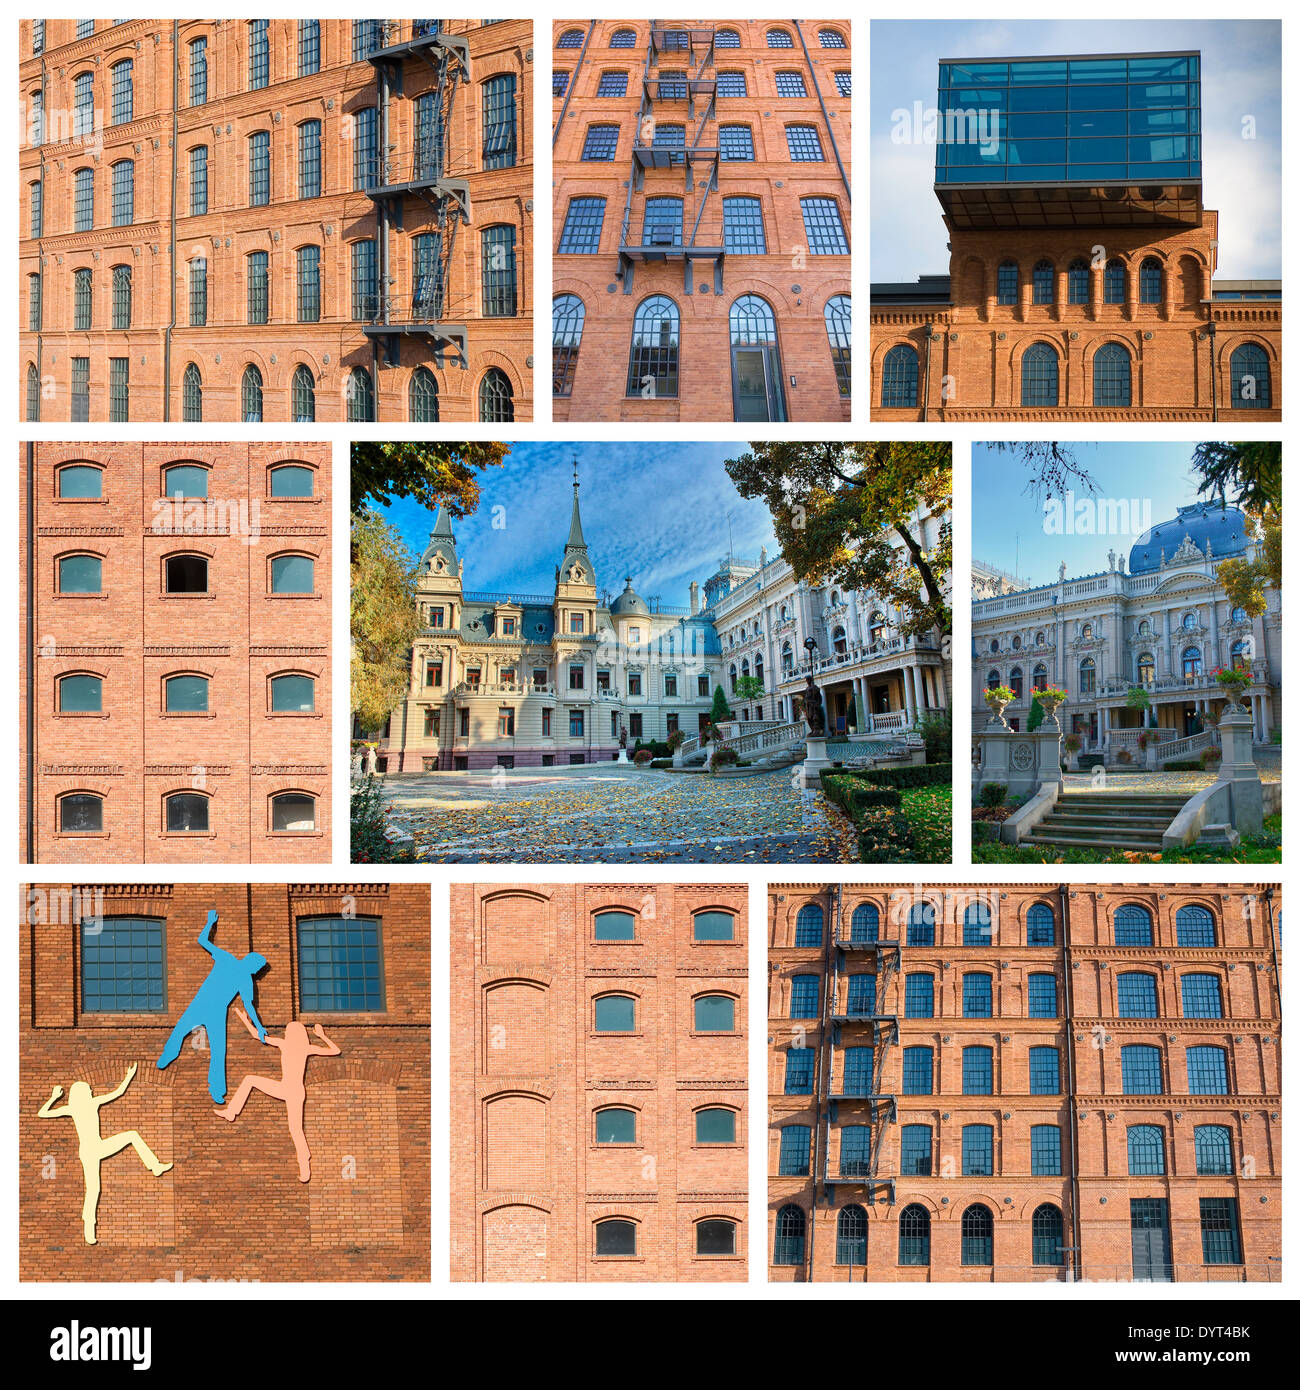 Photo collage from Lodz, Poland. Collage includes pictures of the Izrael Poznanski's industrial complex - Manufaktura Stock Photo